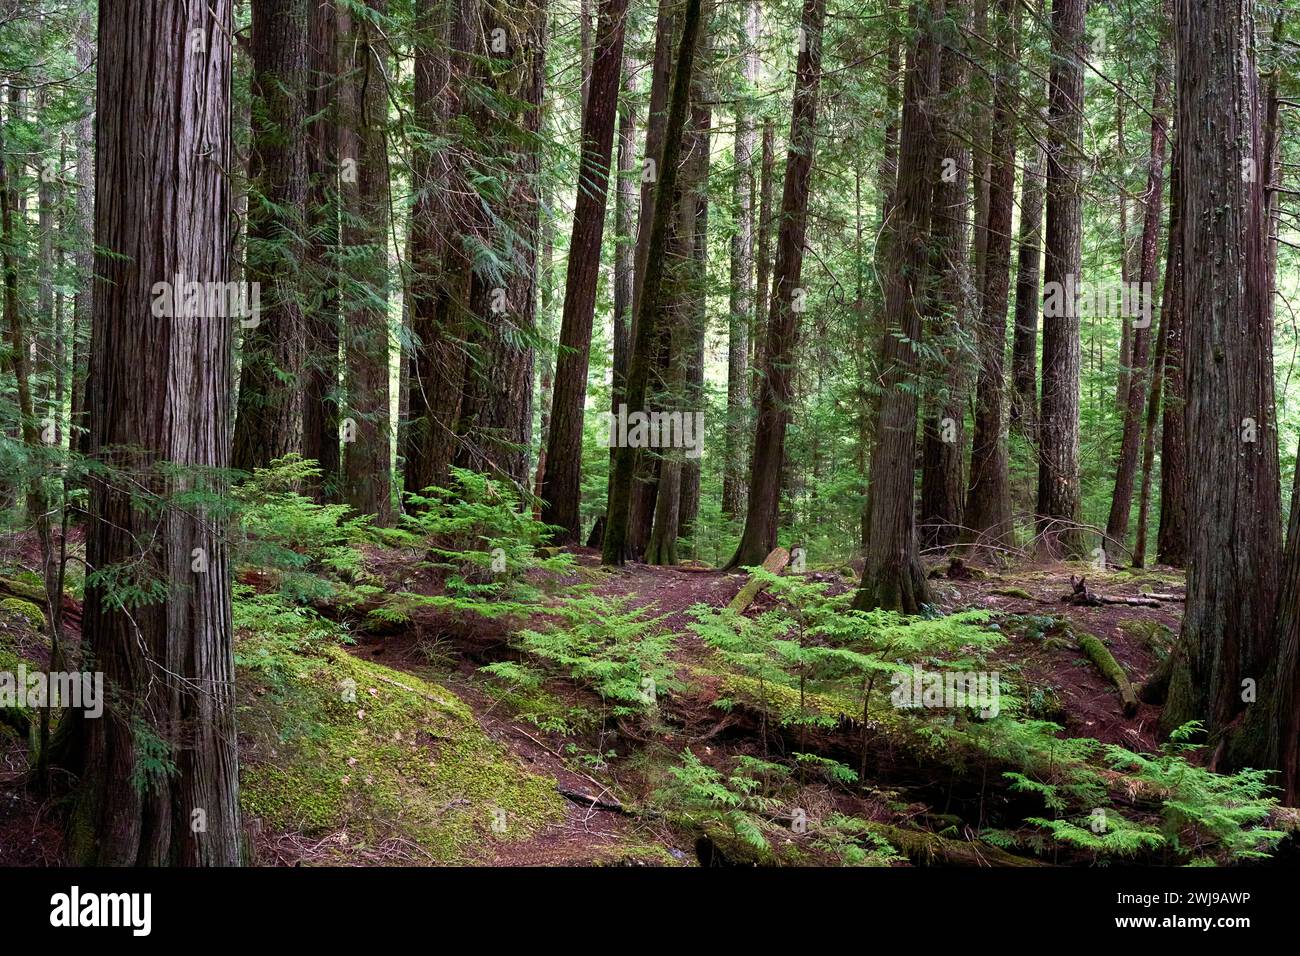 View of the lush, green, coniferous forest as seen at a local provincial park with towering trees, small trees and moss. Stock Photo